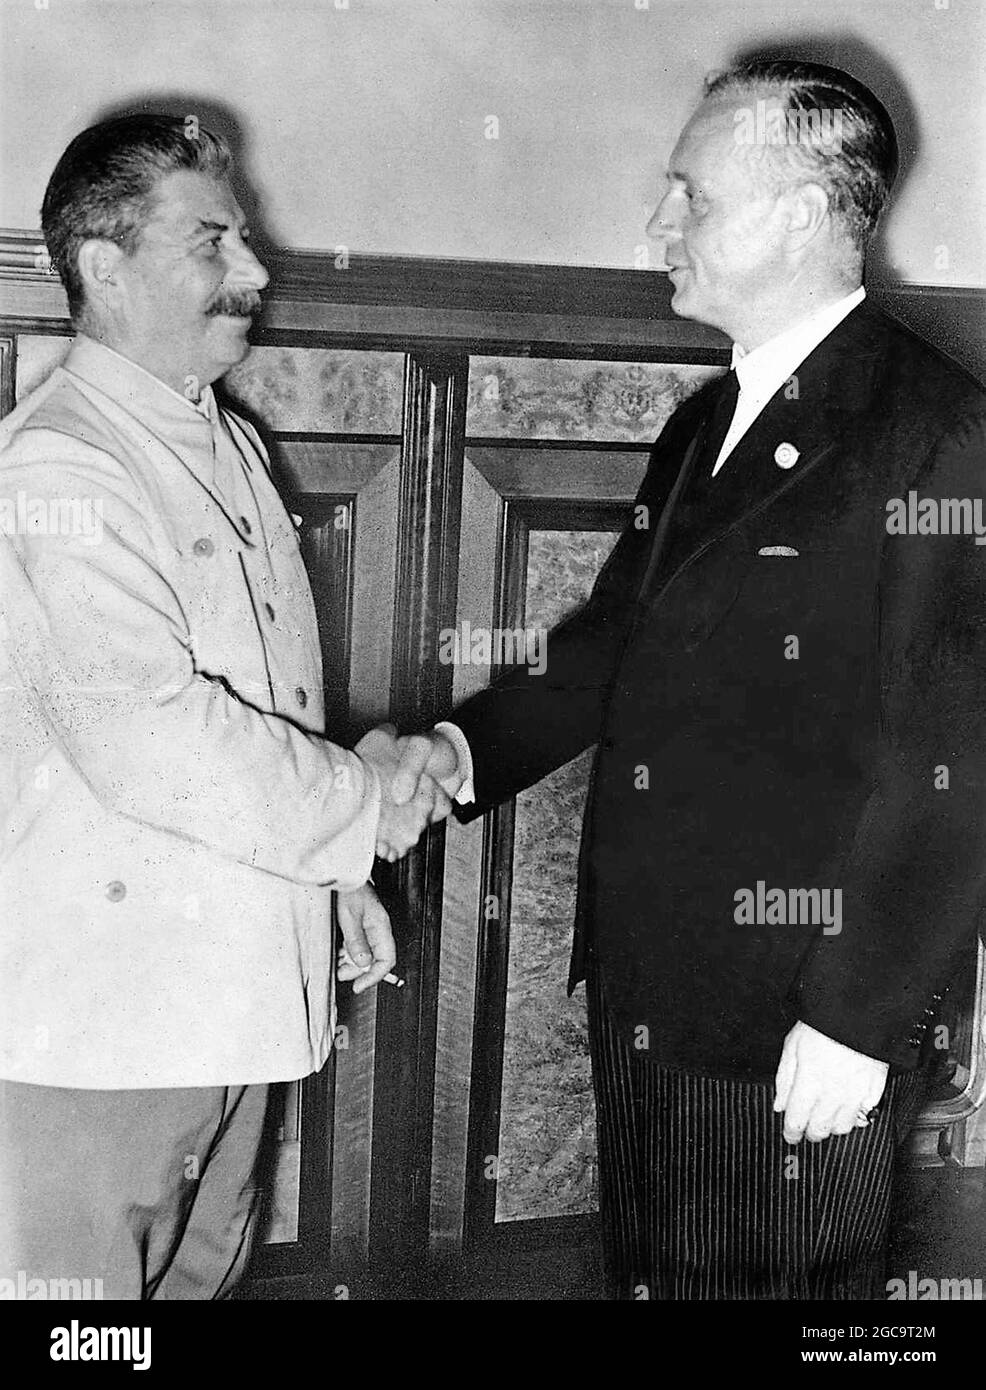 Stalin and Ribbentrop shake hands at the signing of the Nazi-Soviet Pact in Moscow 1939 Stock Photo